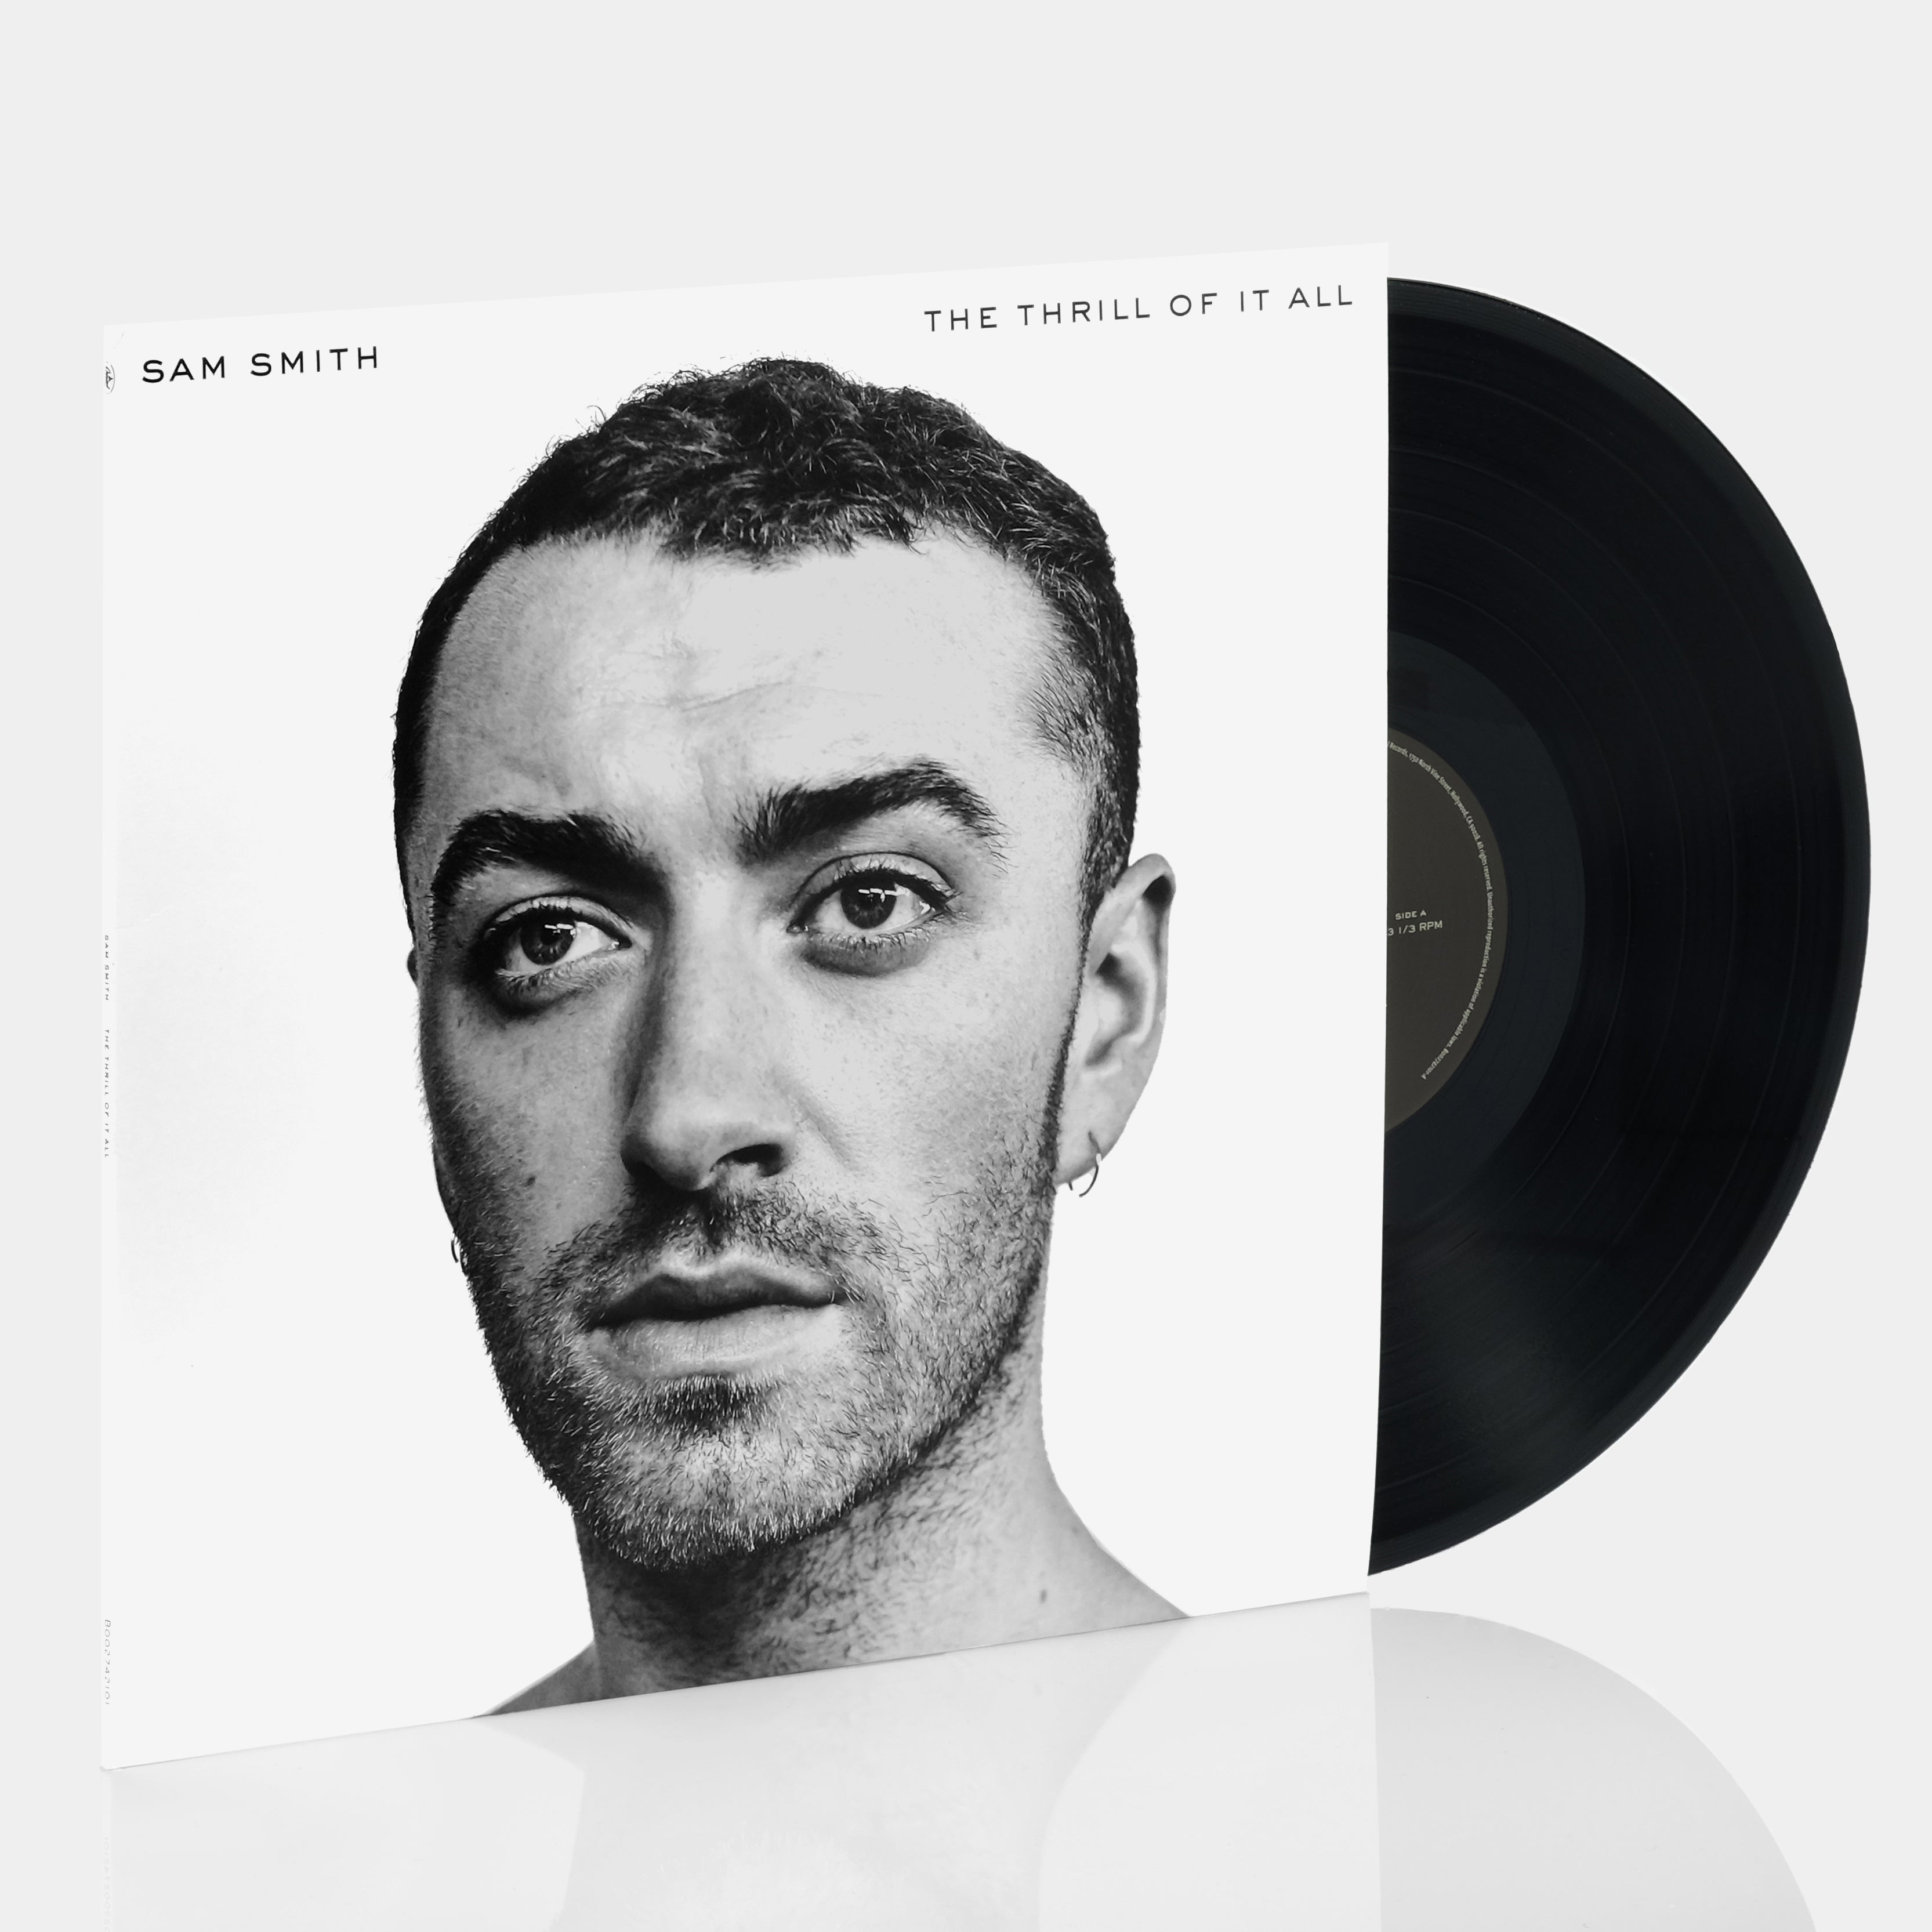 Sam Smith - The Thrill Of It All LP Vinyl Record